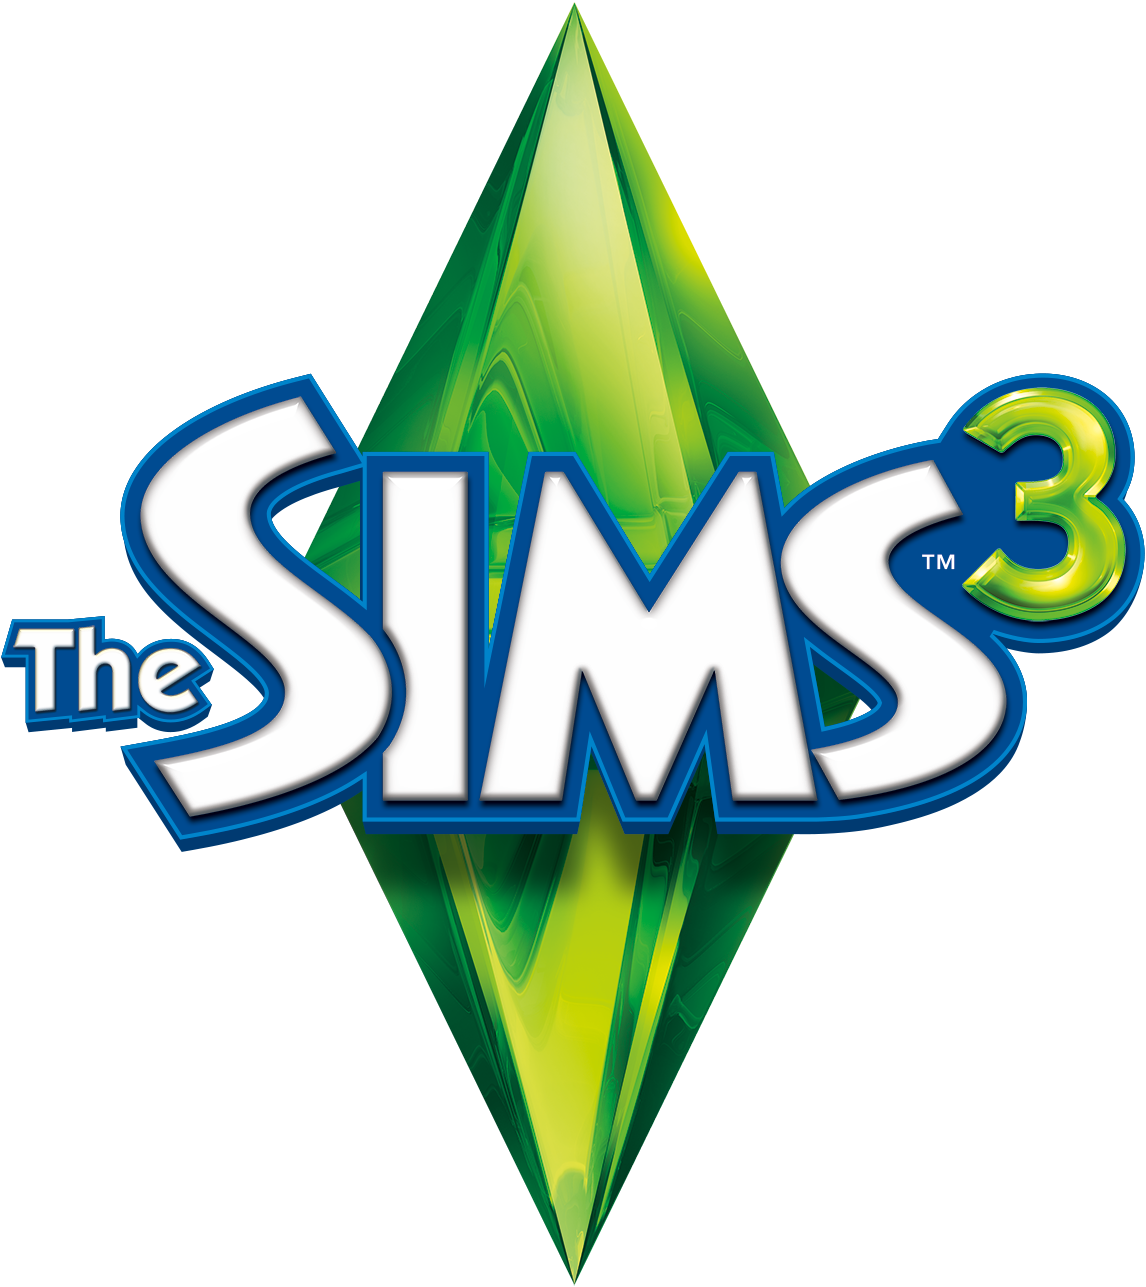 PC Cheats - The Sims 3 Guide - IGN